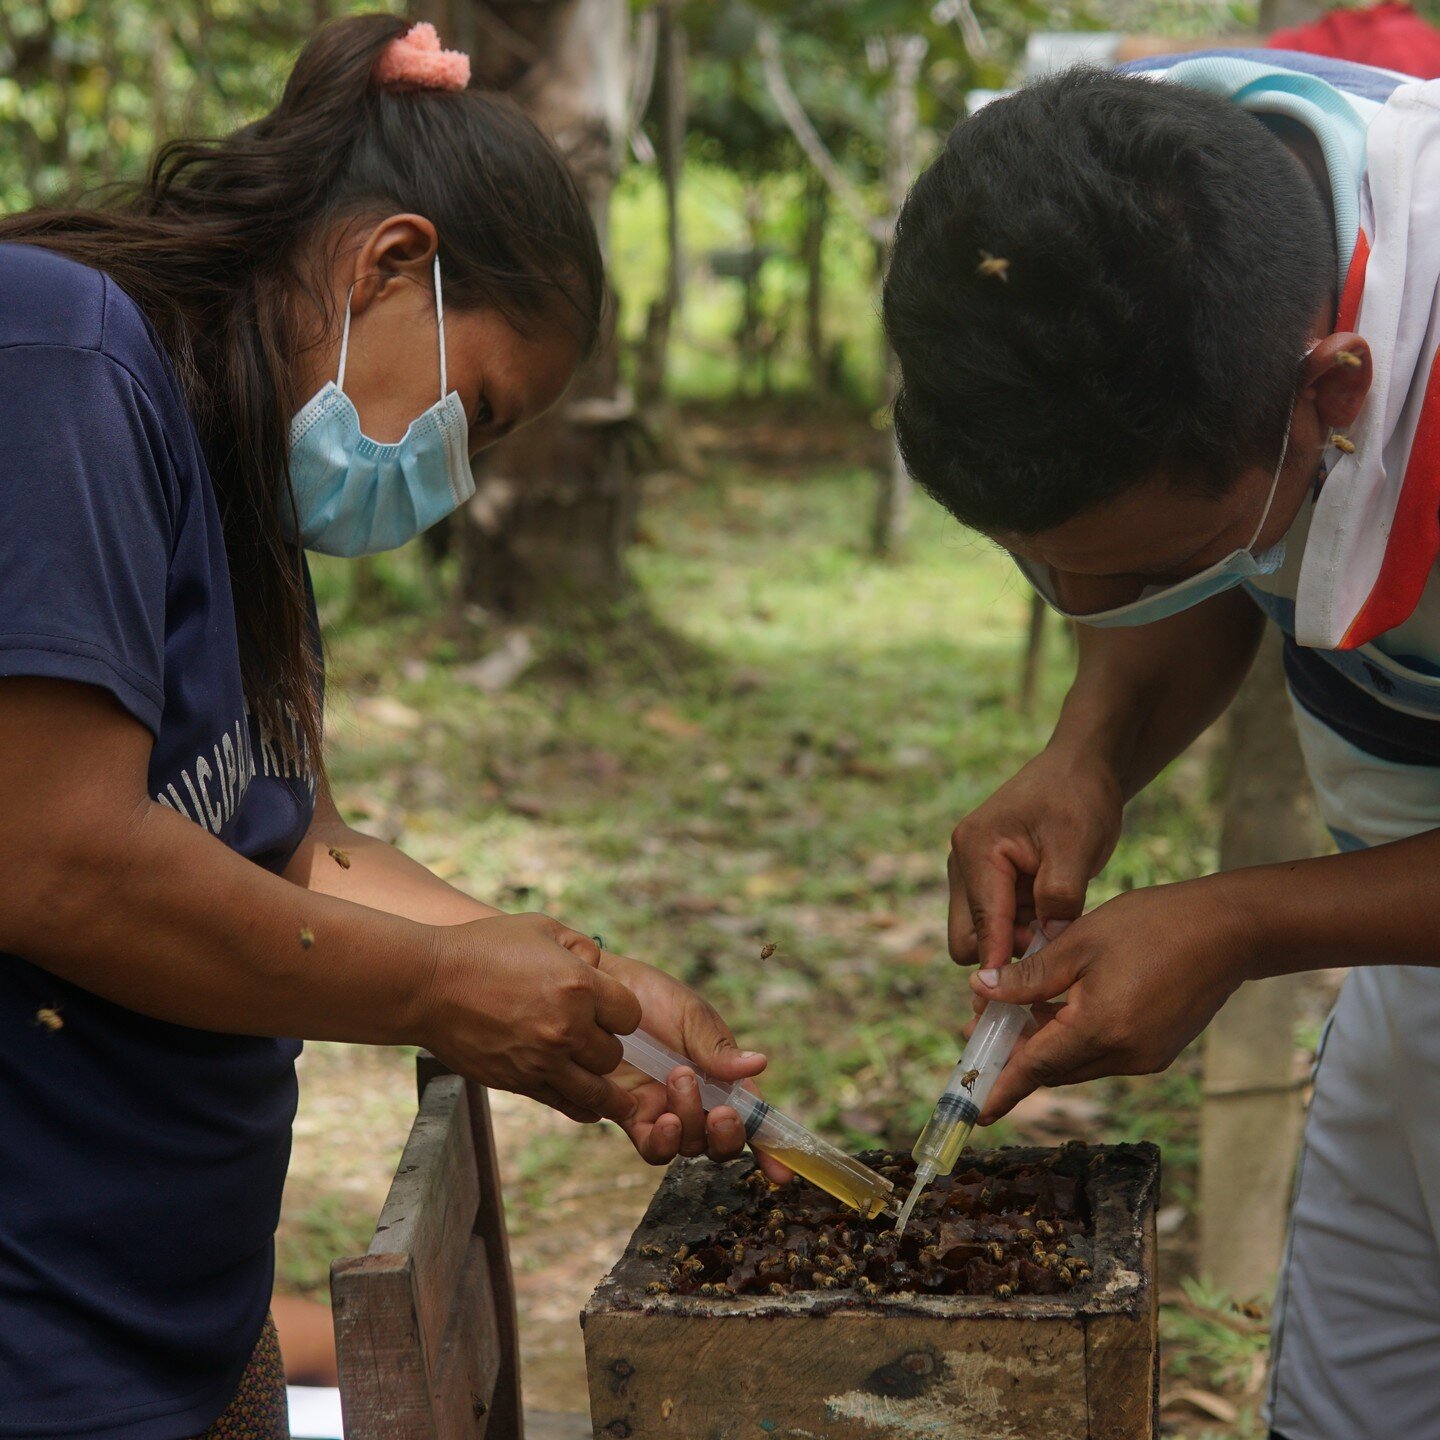 We are excited the Maijuna Stingless Beekeeping School is growing! 

Recently, the OnePlanet team held a training for Maijuna beekeepers in Nueva Vida to take their first steps in becoming beekeeping educators. Neighbors in Maijuna communities and be